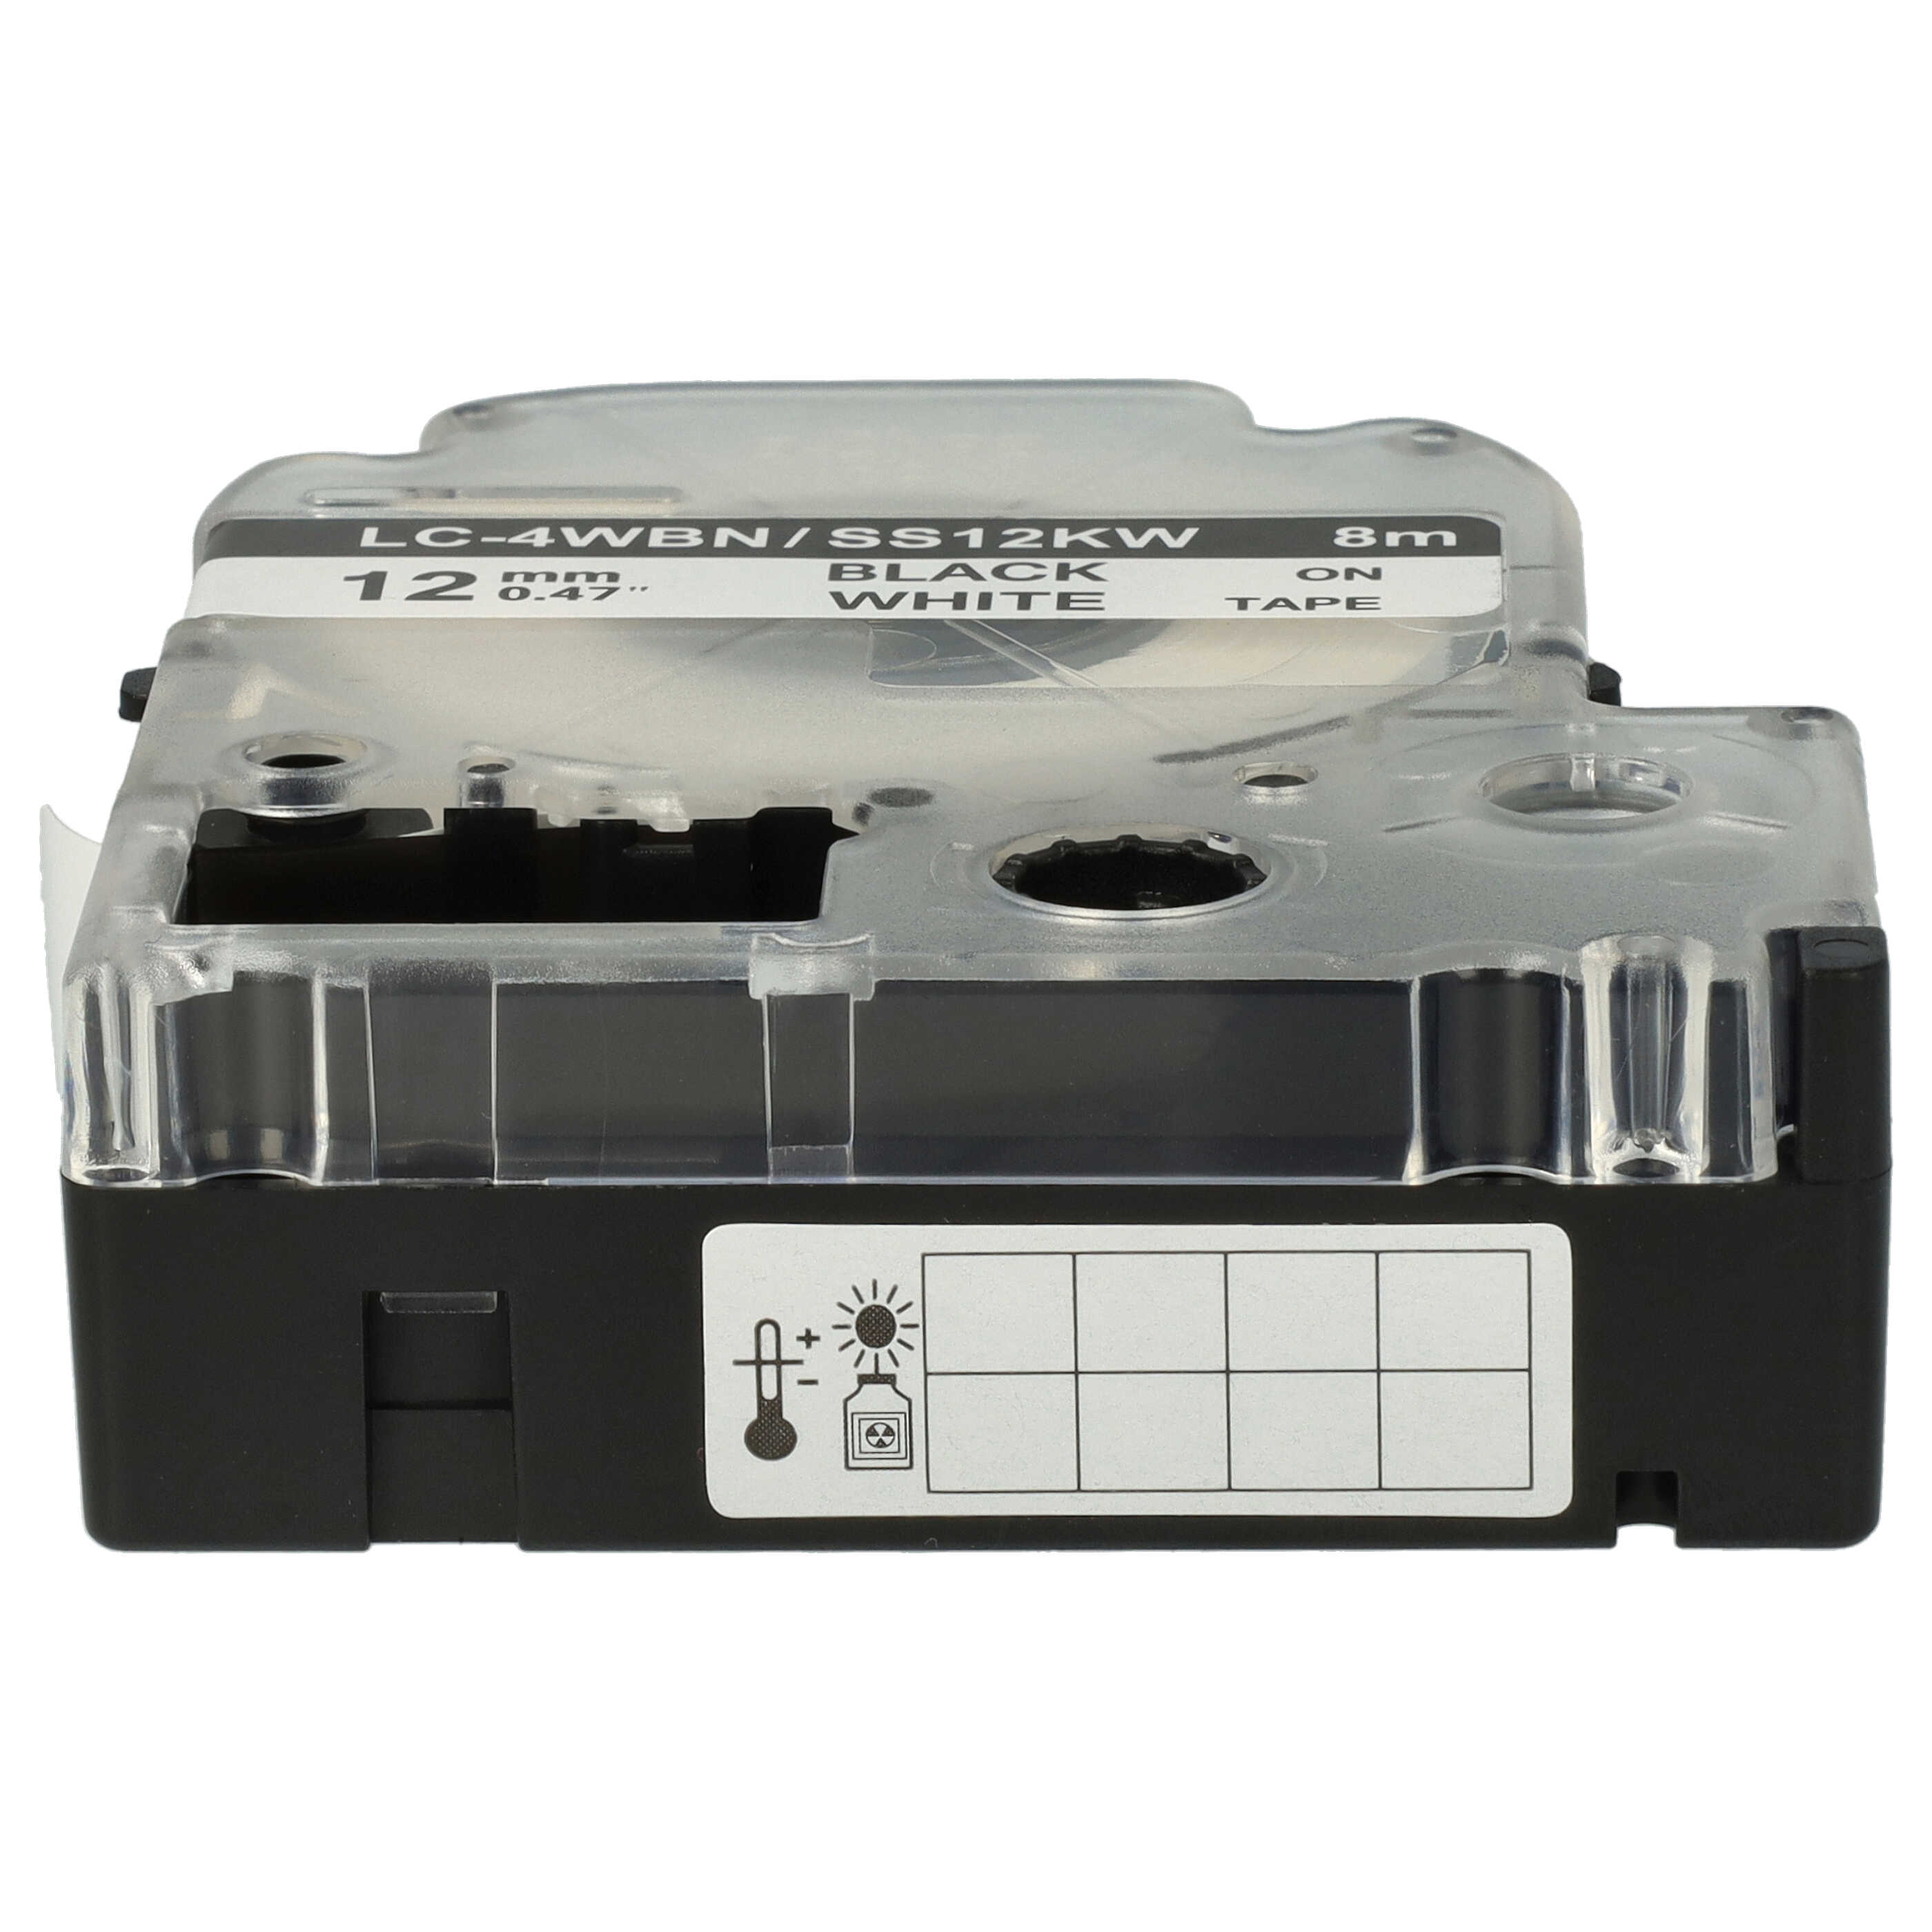 10x Label Tape as Replacement for Epson SS12KW, LC-4WBN - 12 mm Black to White